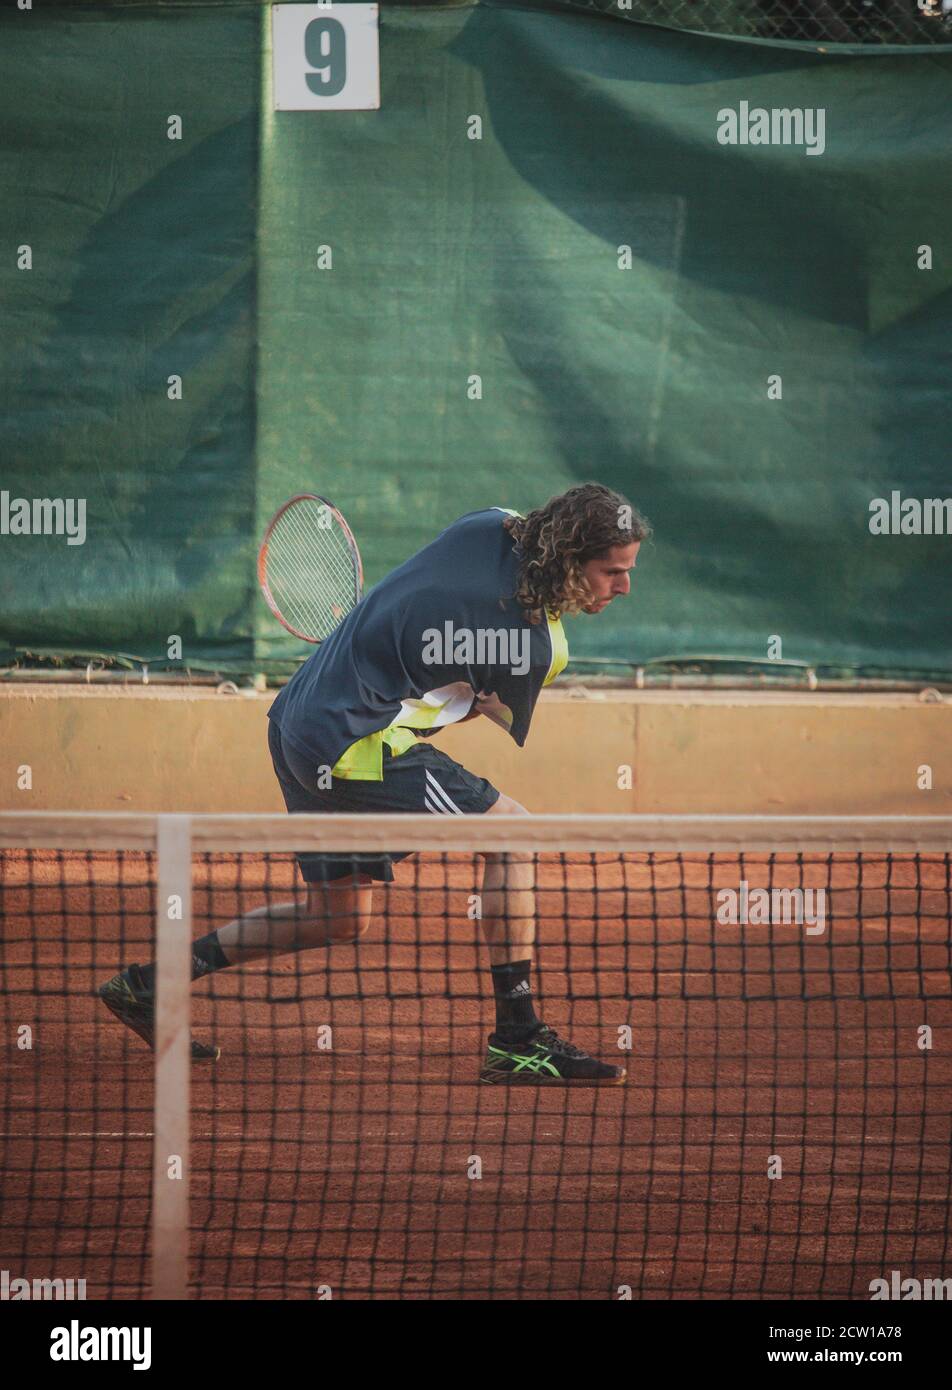 Split Croatia September 2020 Man with long hair in sports shirt and pants playing tennis, swining an underhand ball. Vertical shot, seen from the dist Stock Photo